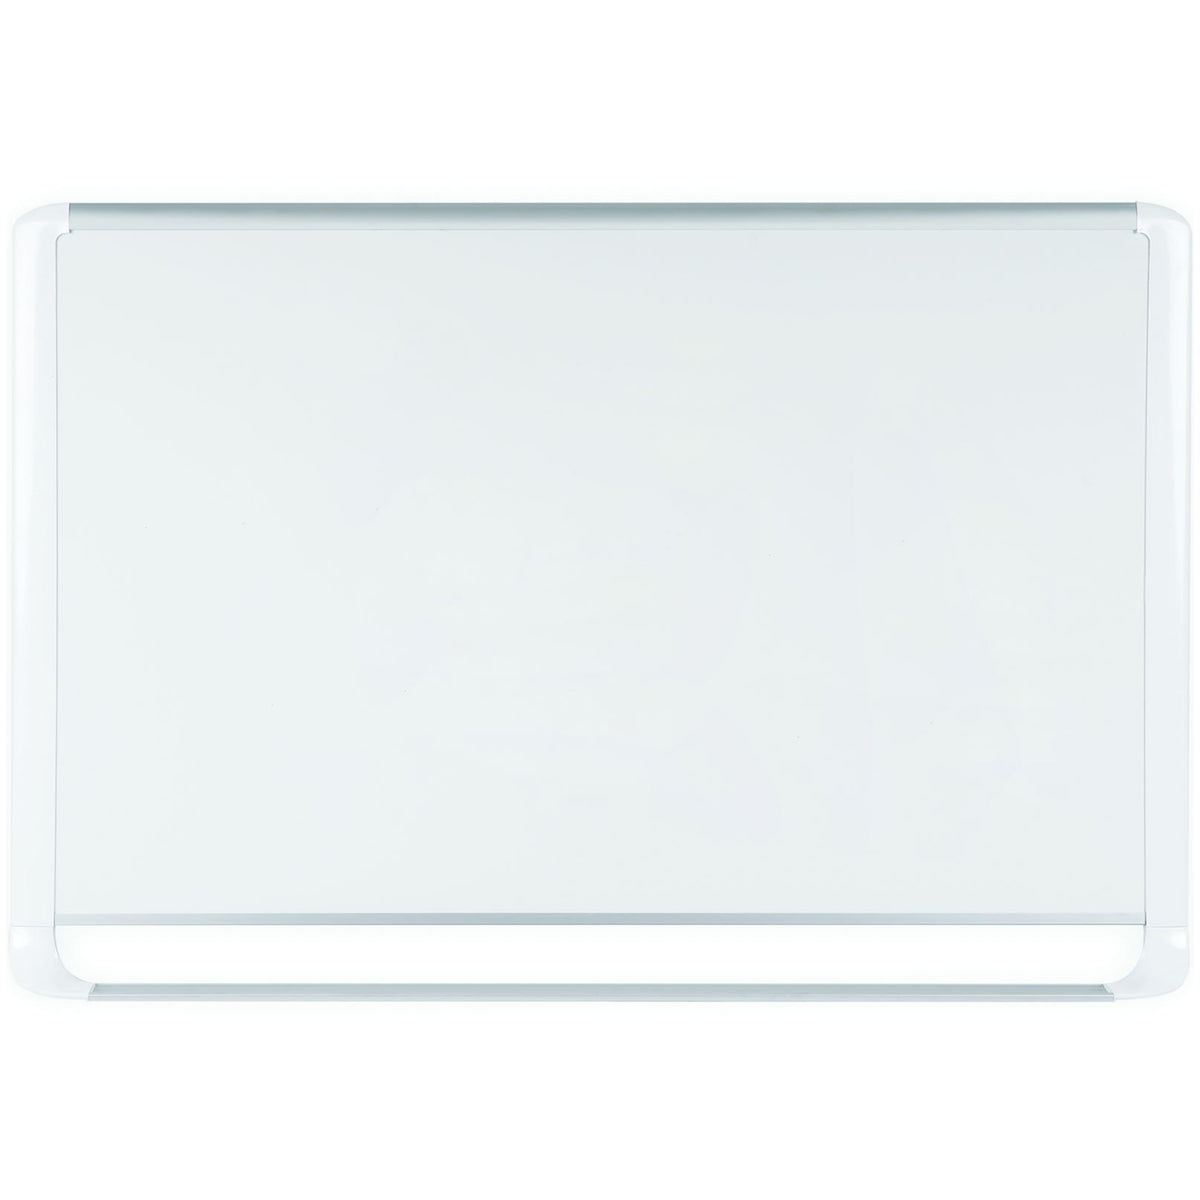 MVI210205 MVI Series Magnetic Laquered Steel Dry Erase Board, Easy Clean, Scratch Resistant Wall Mounting Whiteboard, 48" x 96", White Frame by MasterVision